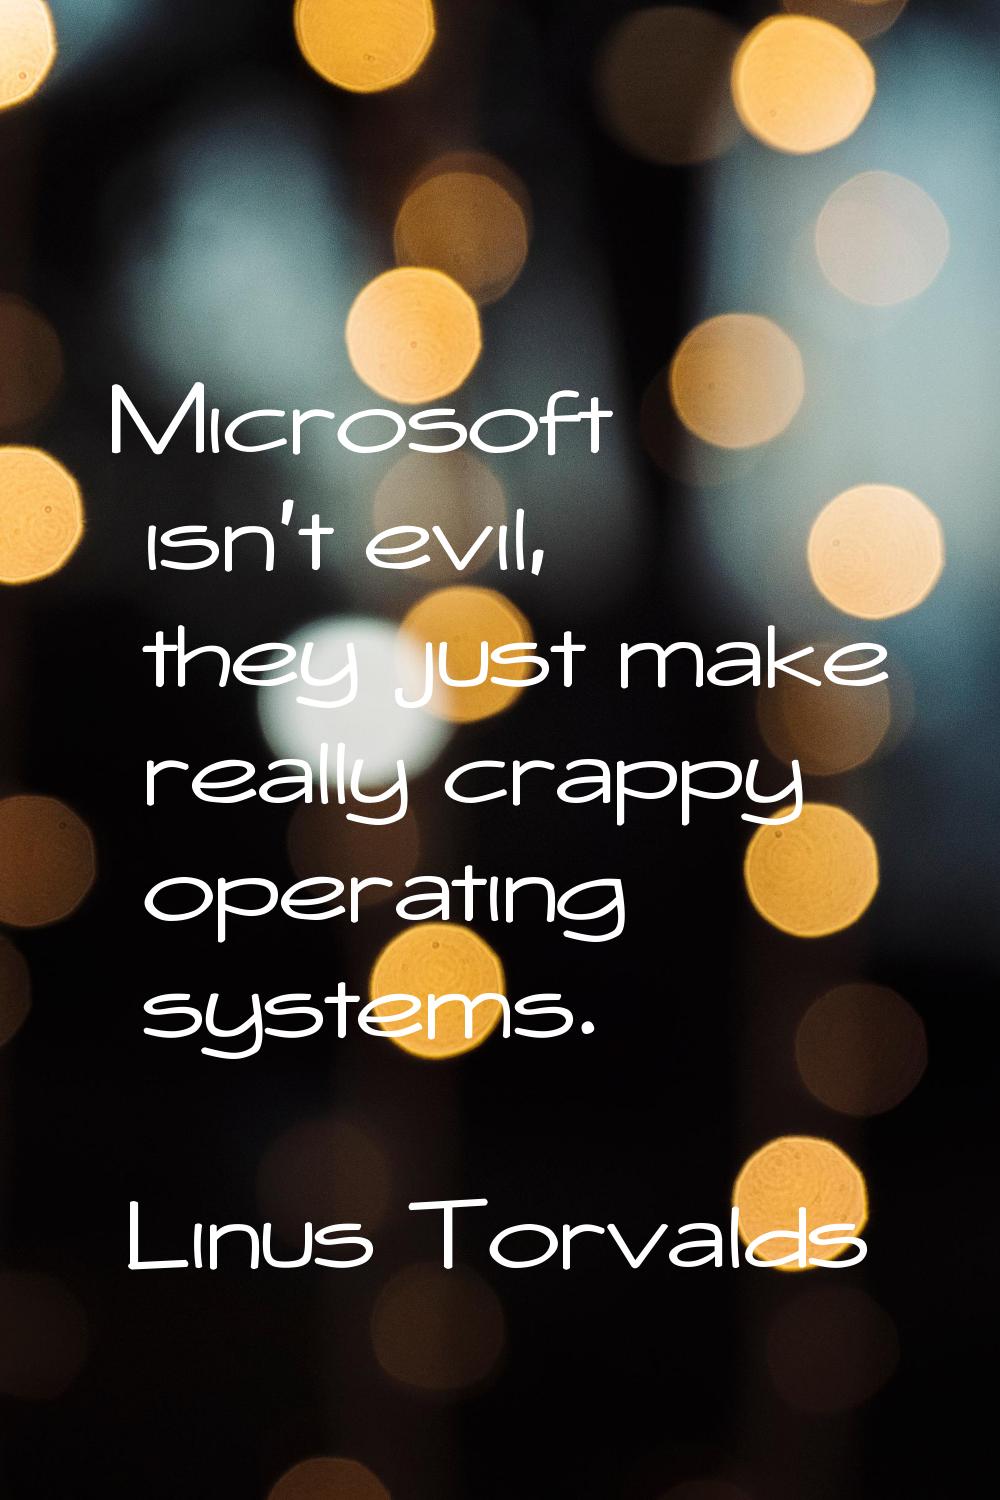 Microsoft isn't evil, they just make really crappy operating systems.